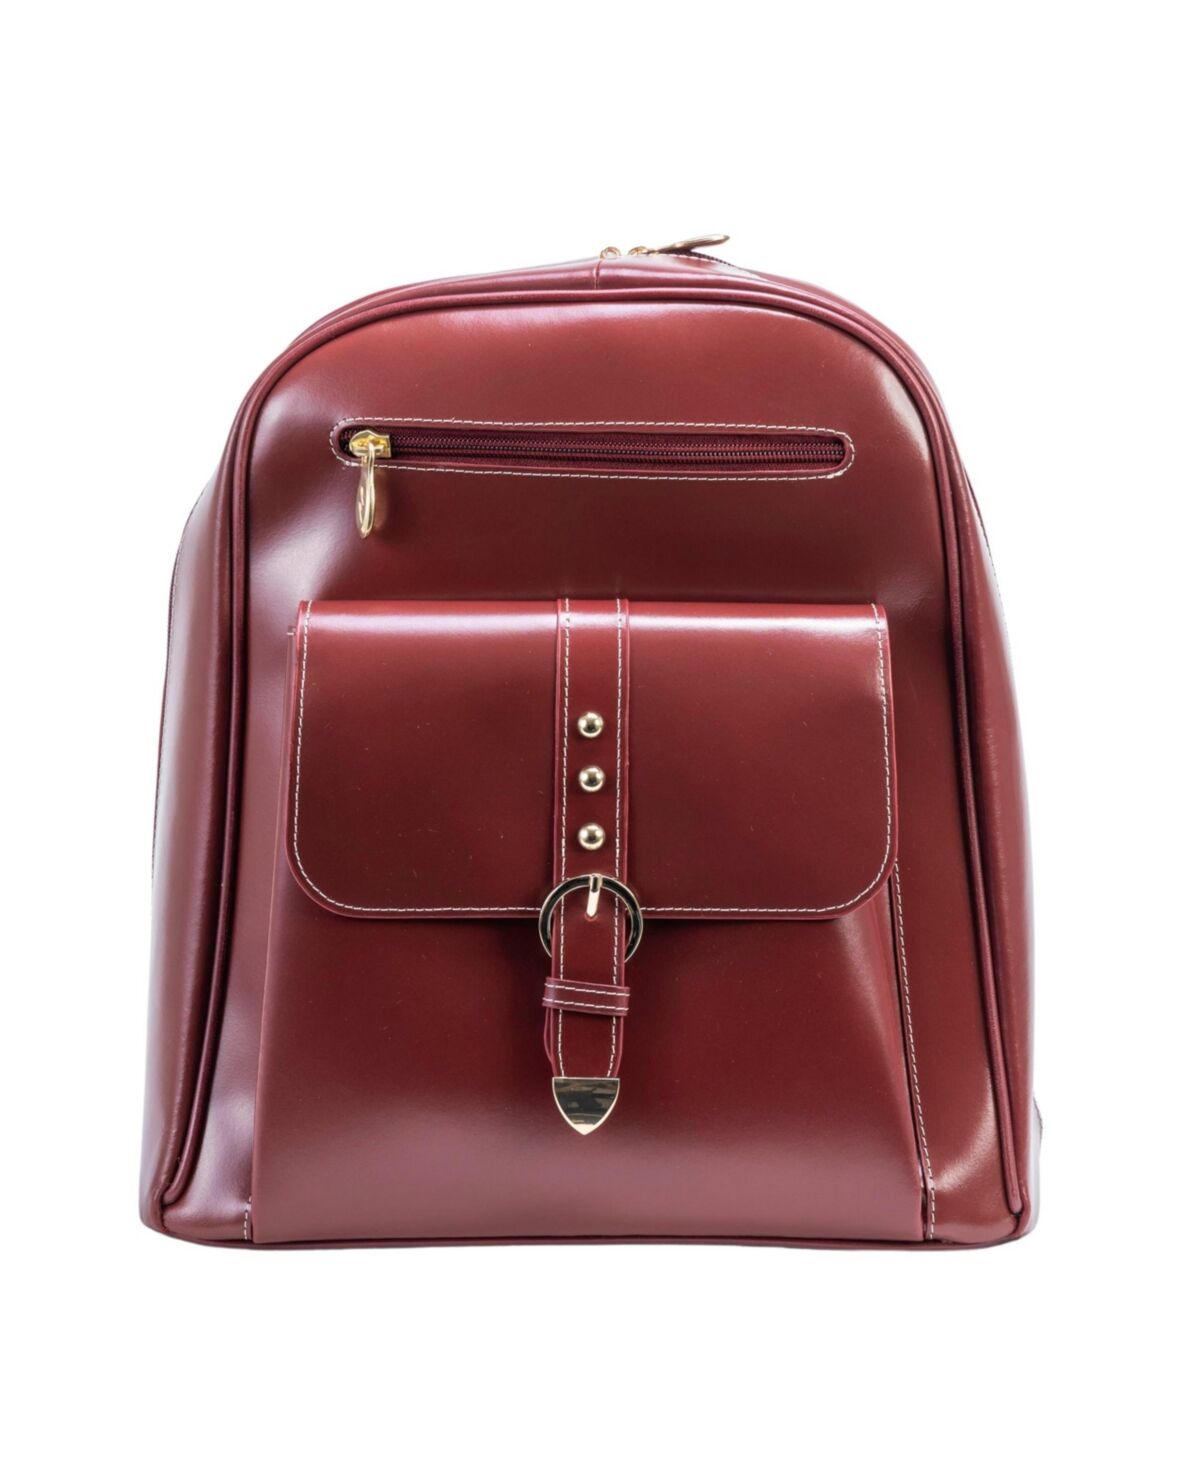 McKlein Madison Leather Business Laptop Tablet Backpack - Red